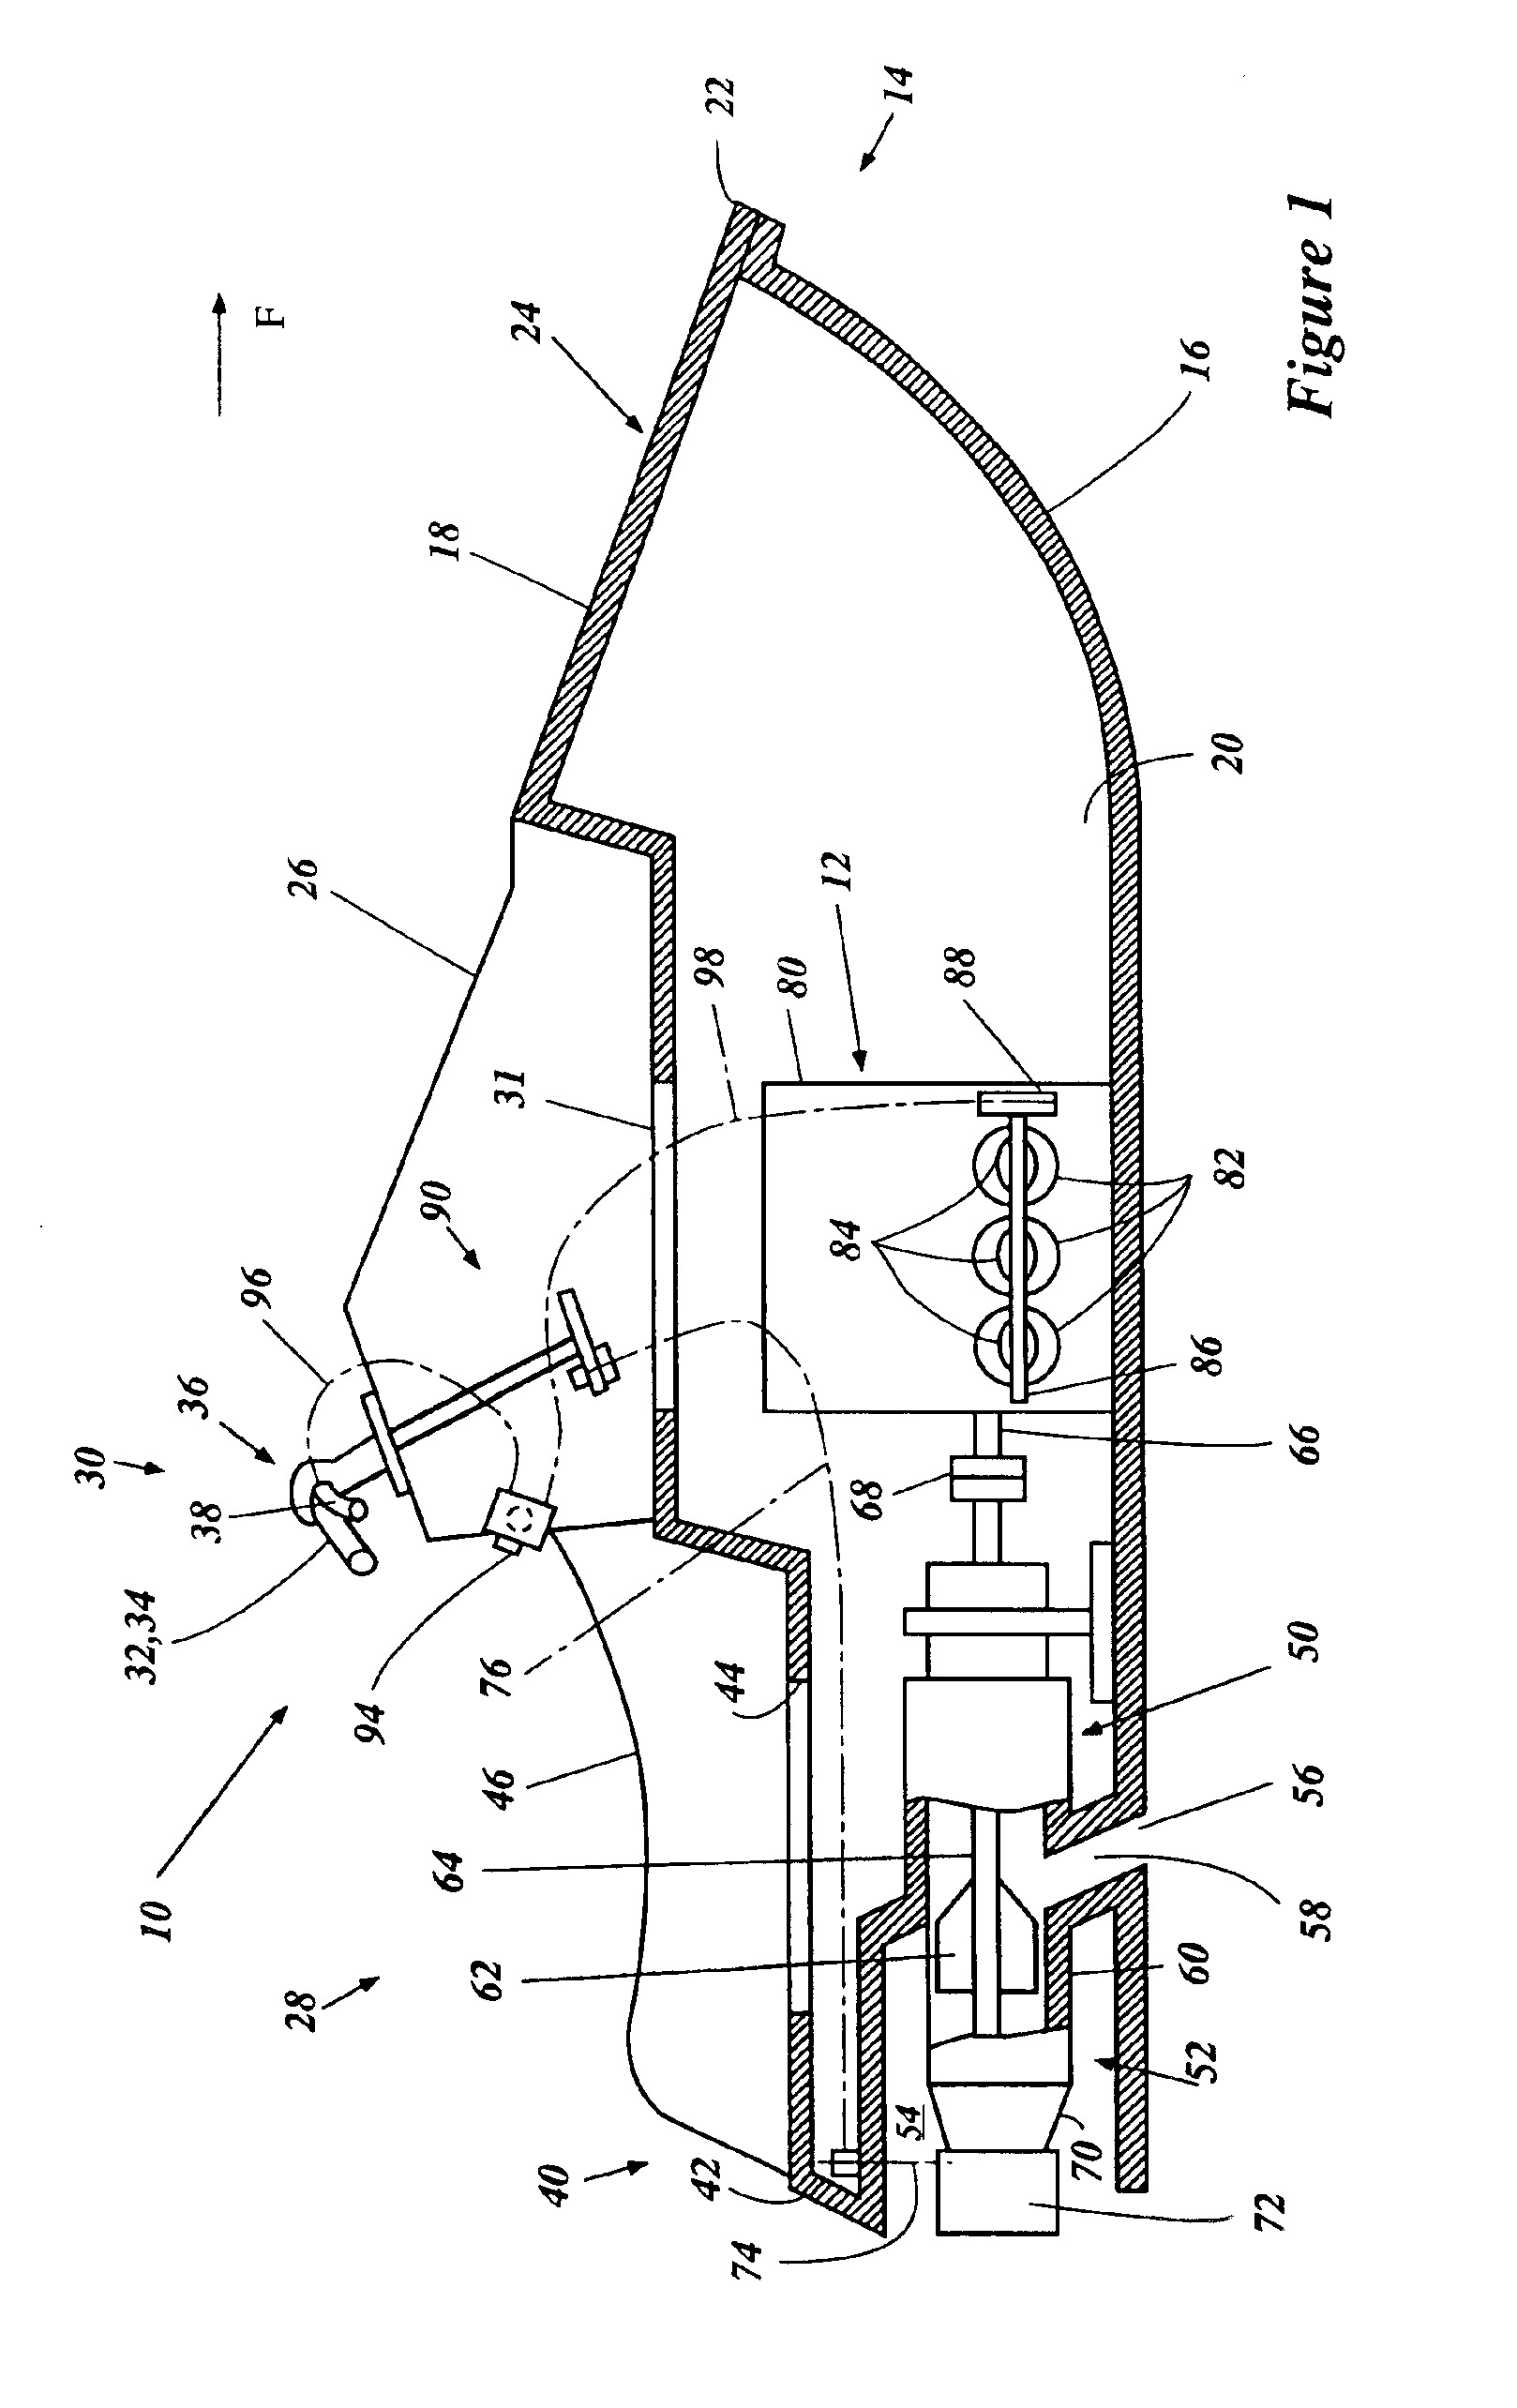 Engine control device for water vehicle